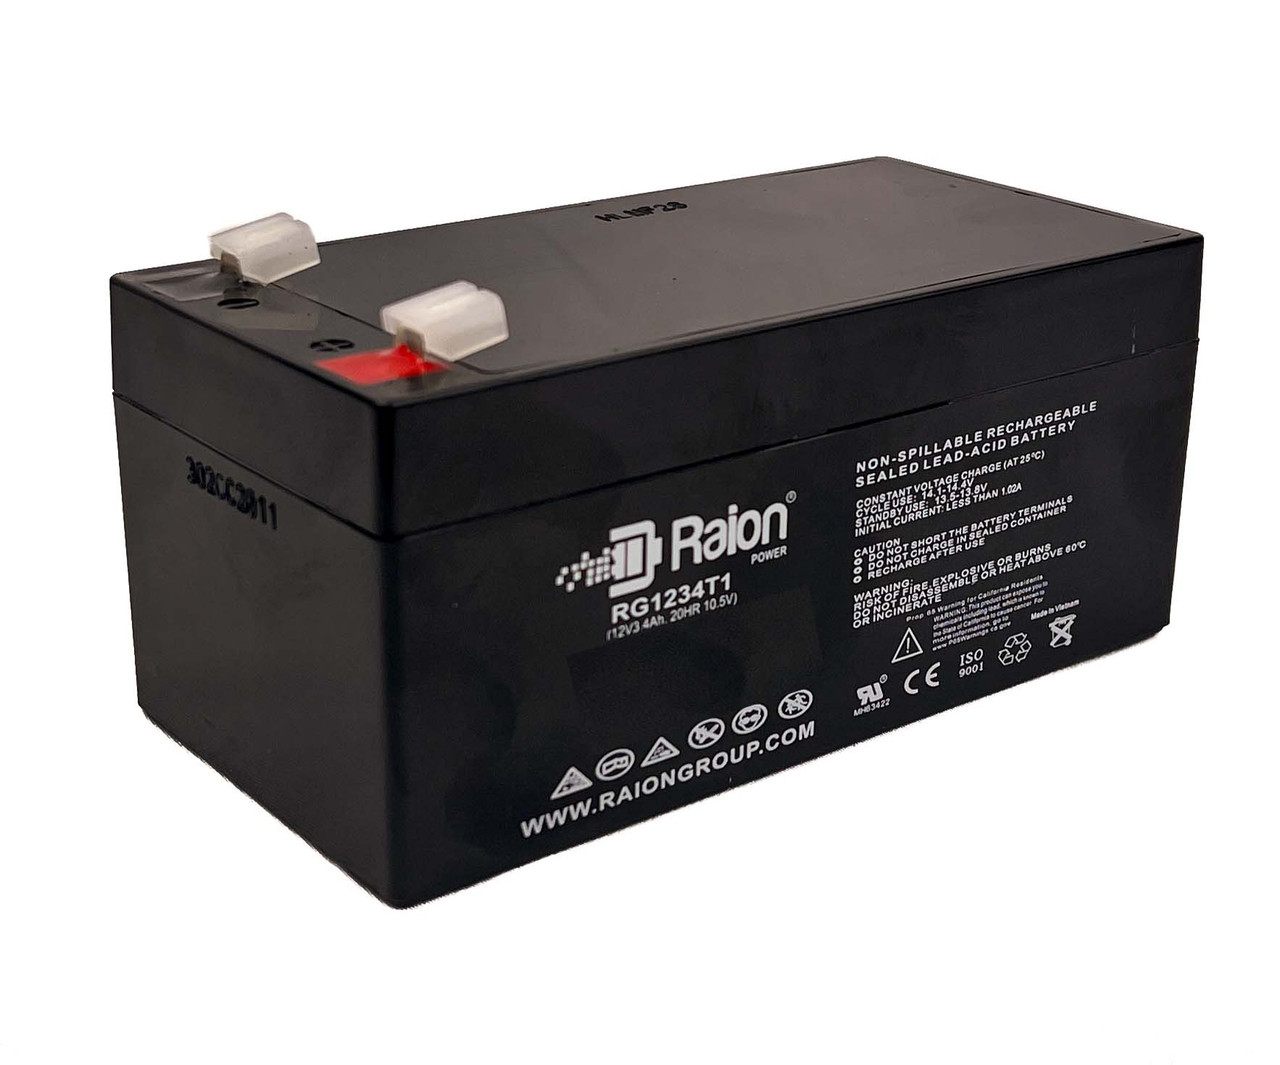 Raion Power 12V 3.4Ah Non-Spillable Replacement Battery for Criticare Systems Poet I, Poet II, Poet IQ